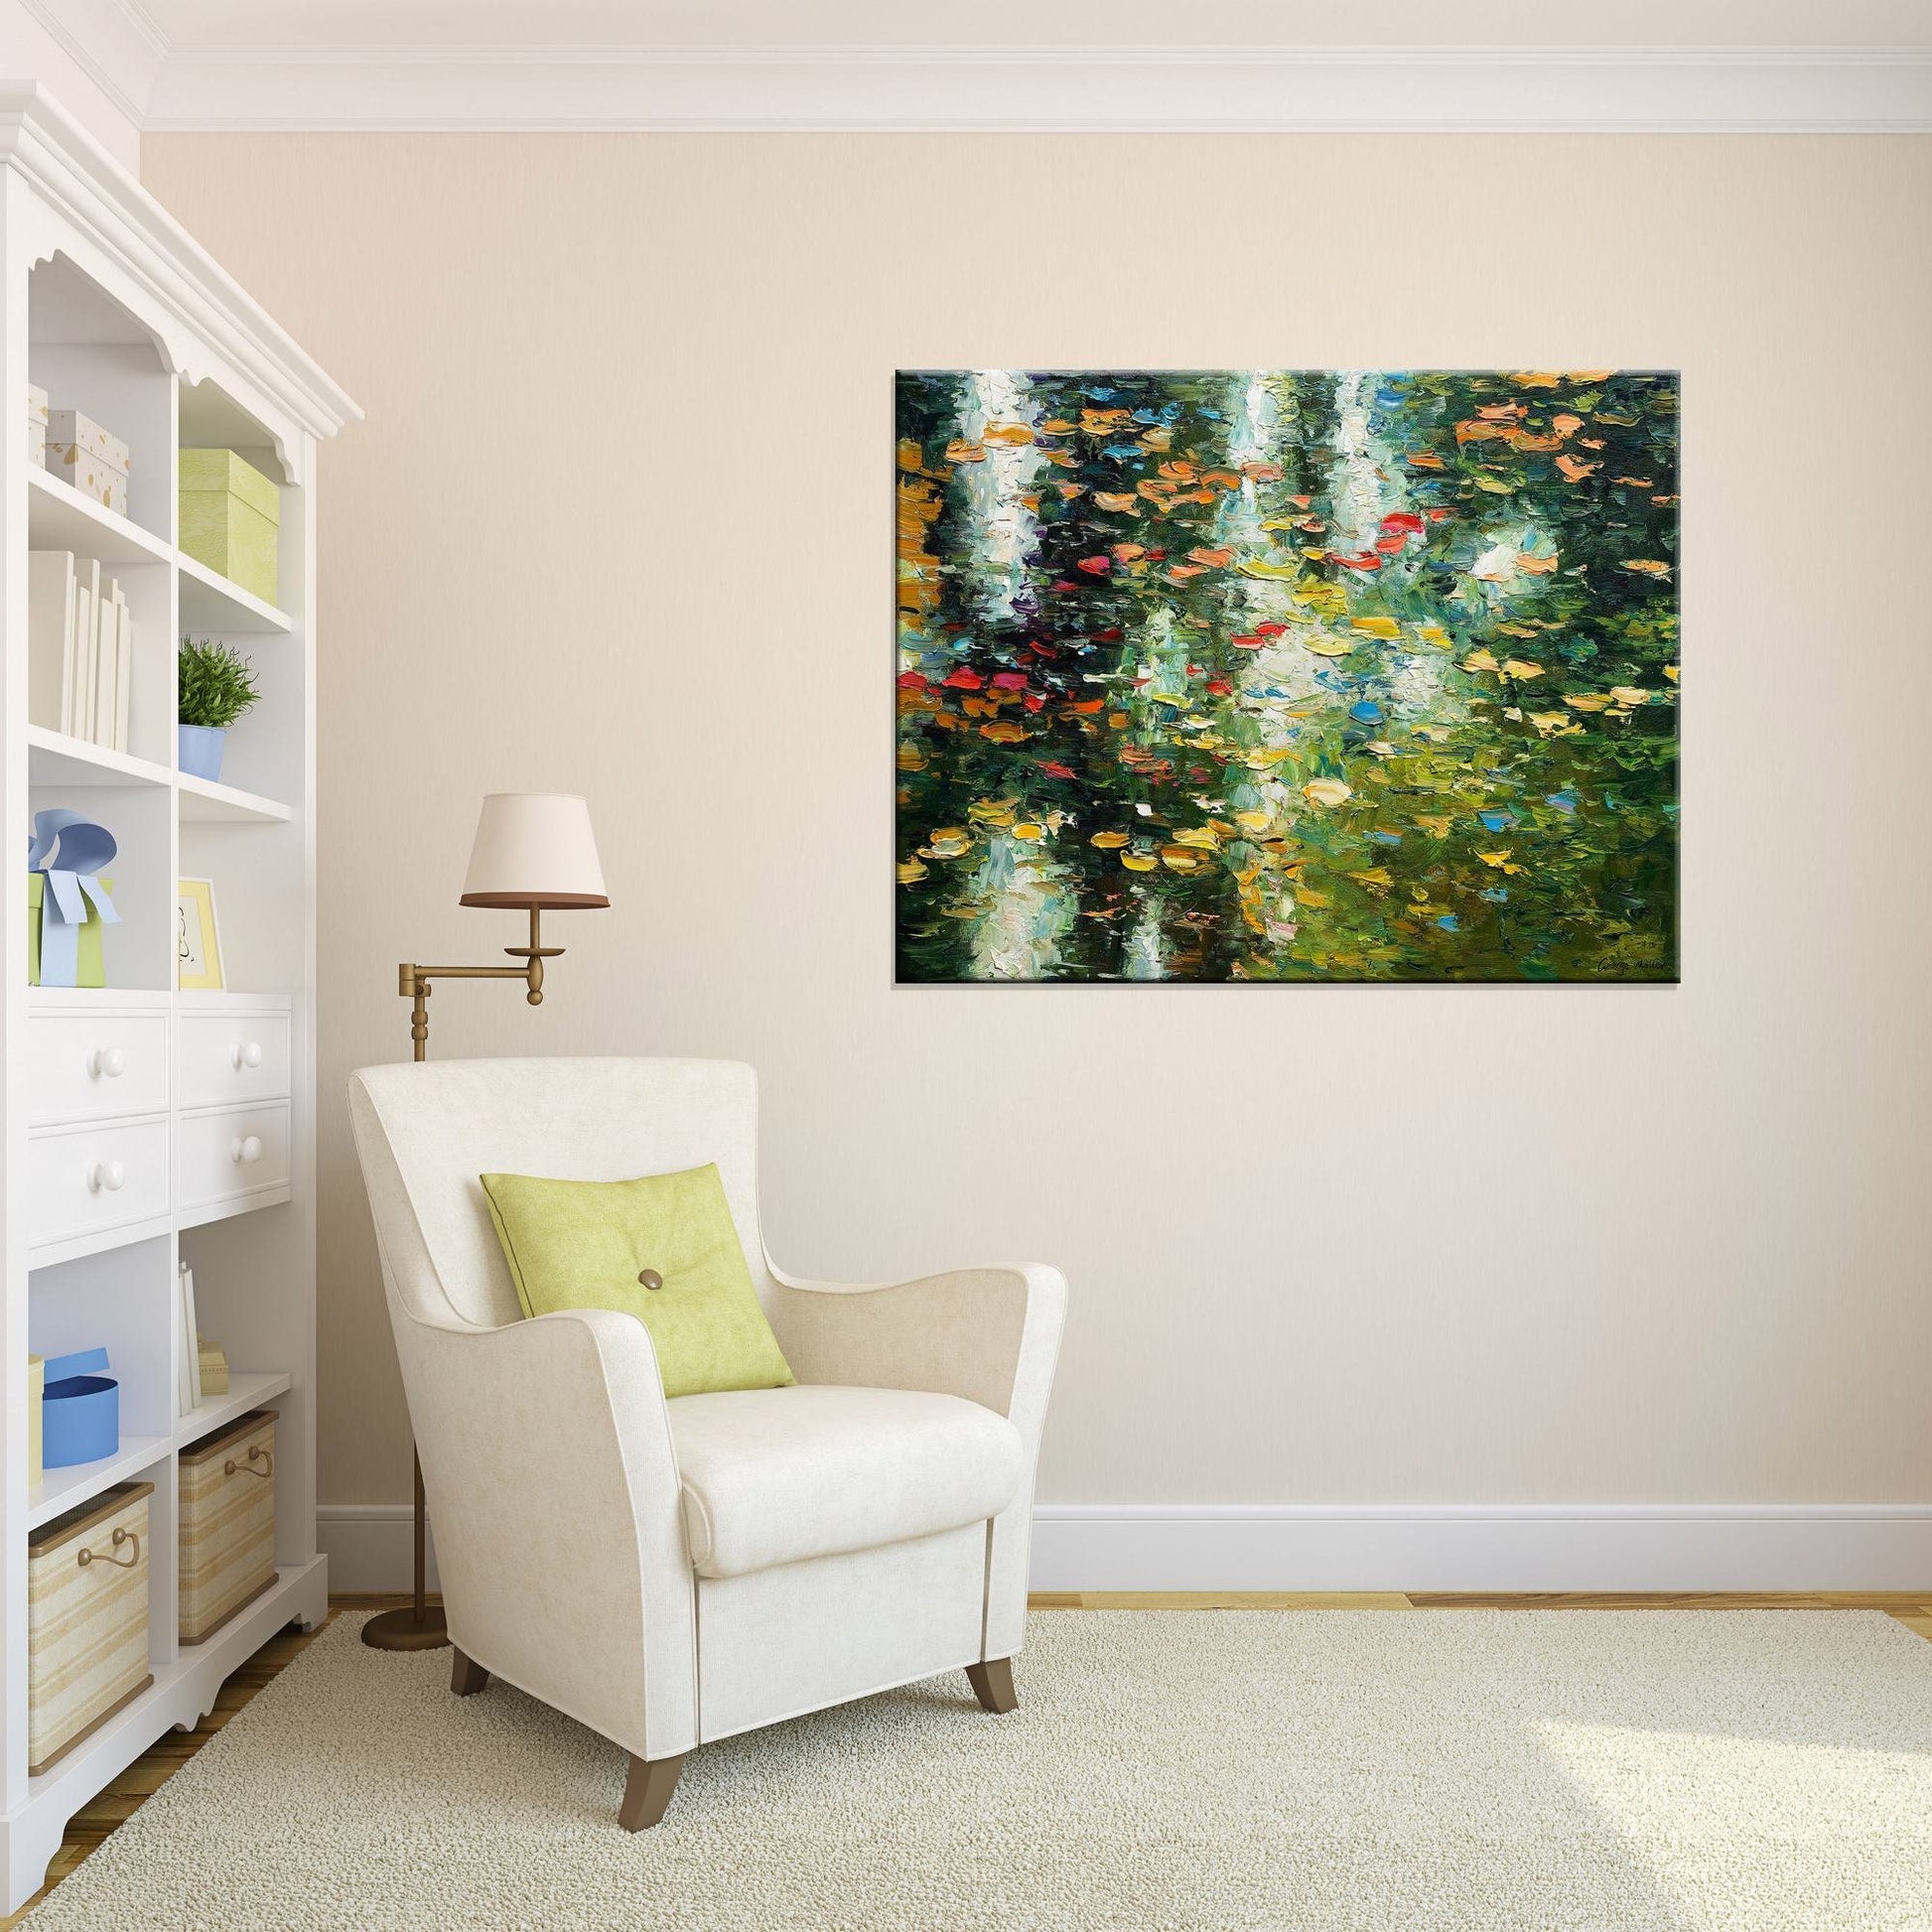 Pond with Waterlilies, Palette Knife Painting, Oil Painting, Large Canvas Art, Wall Decor, Abstract Painting, Large Landscape Painting